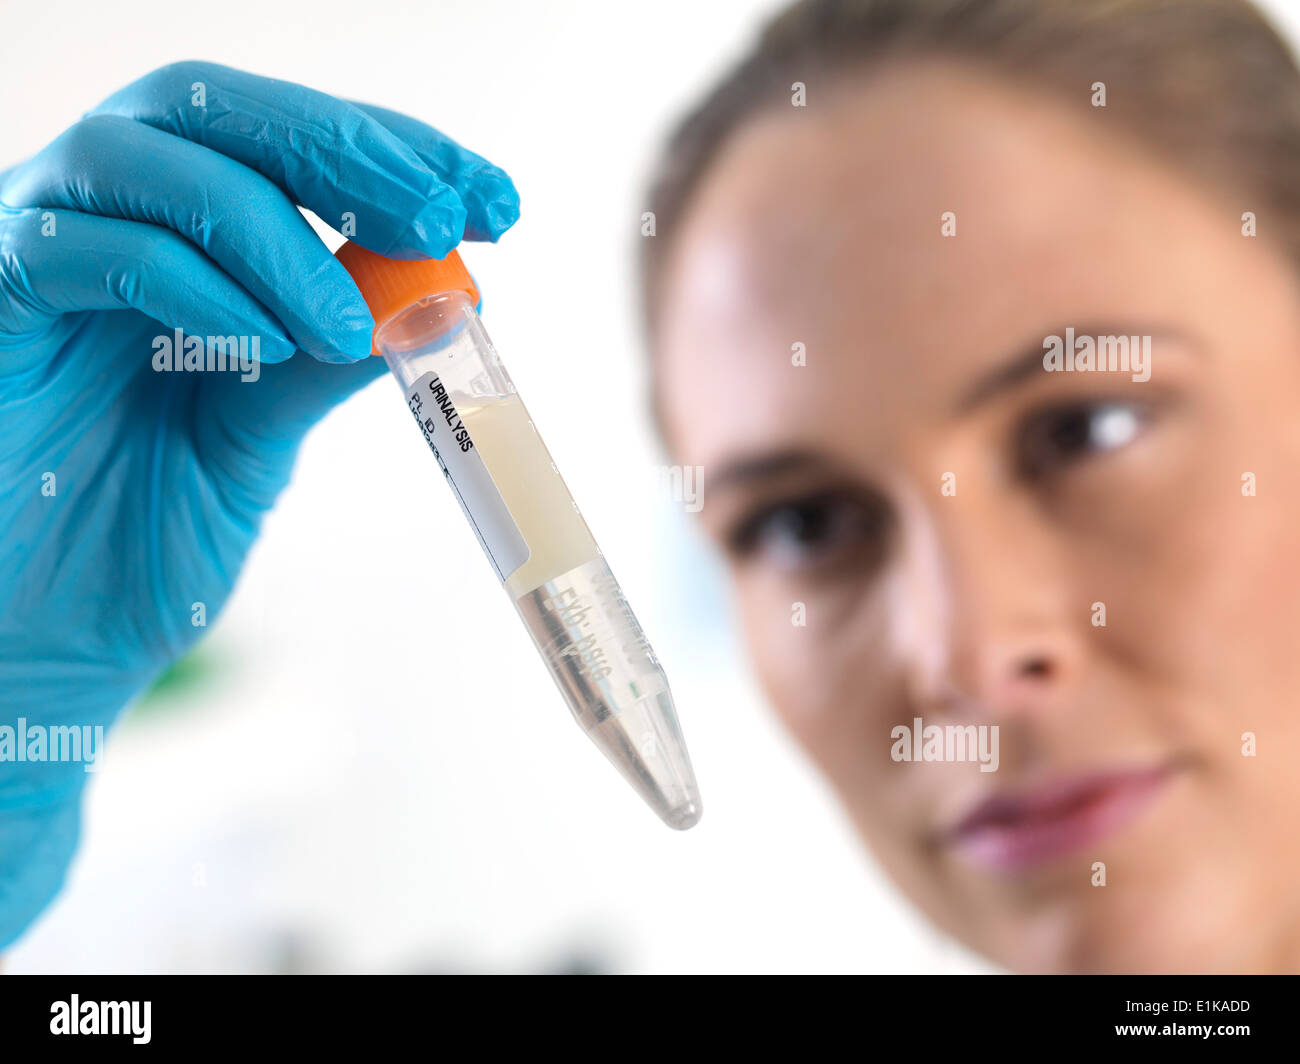 Female scientist holding an eppendorf tube with liquid inside. Stock Photo